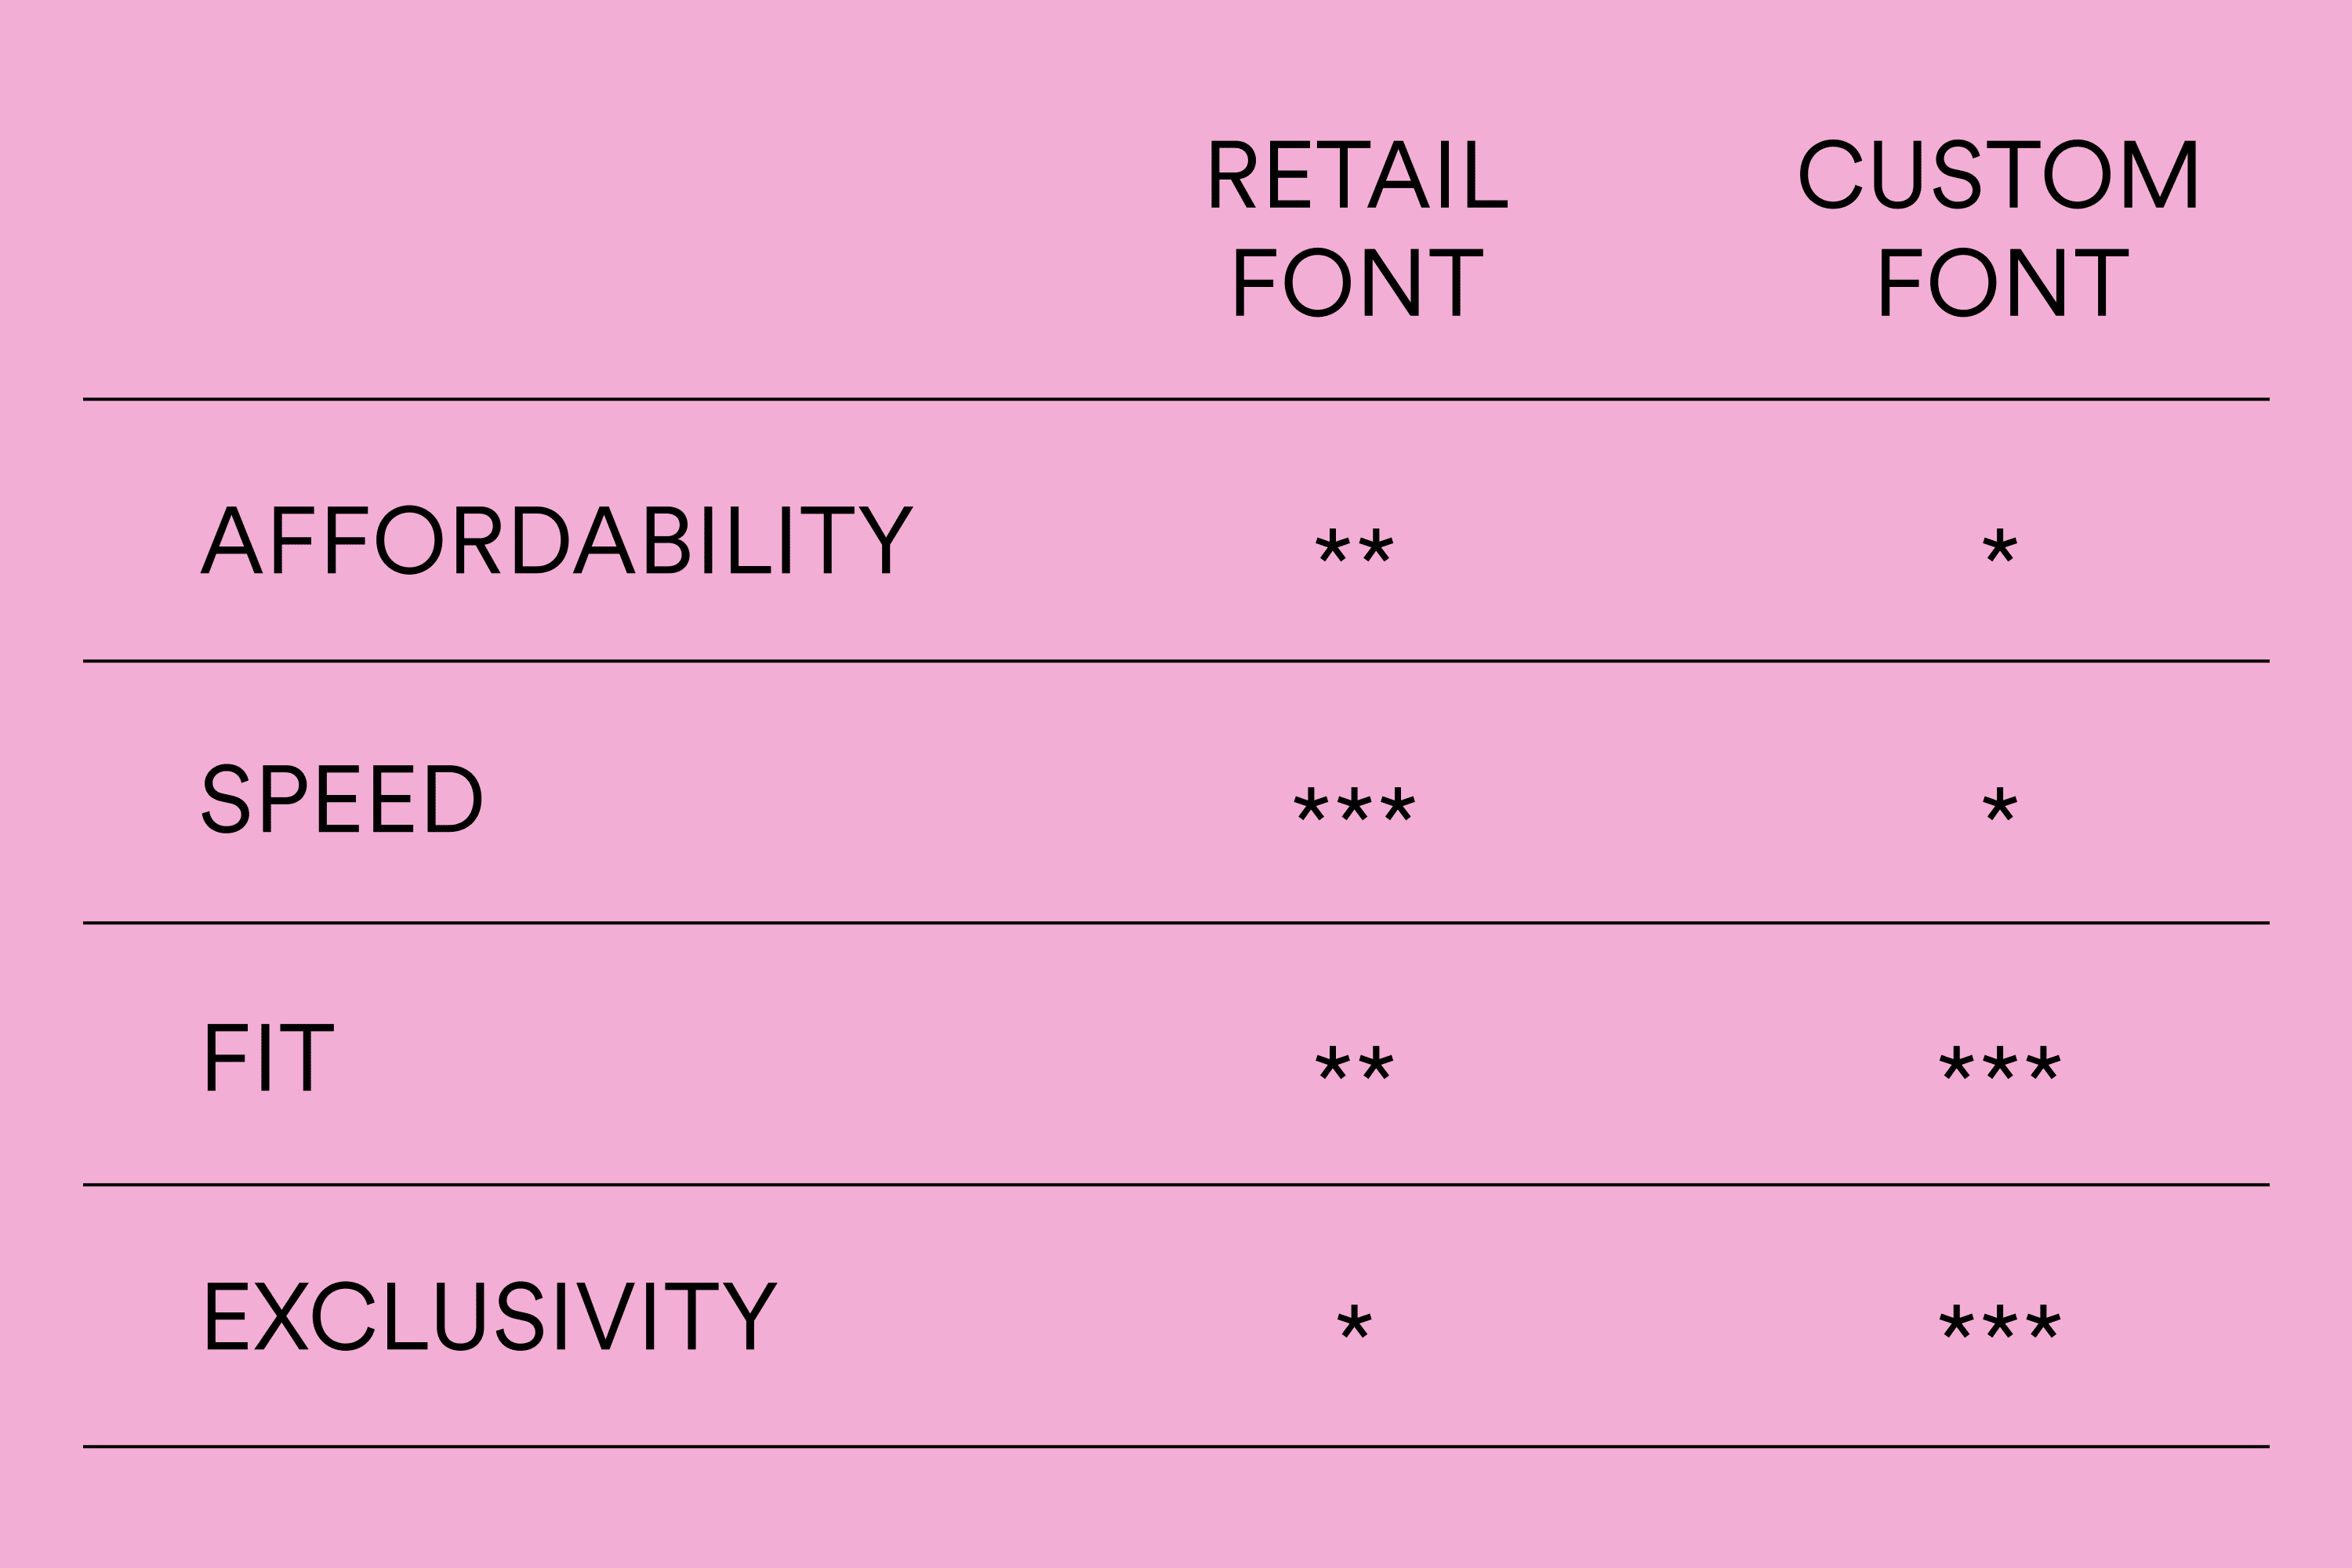 tabel comparing retail fonts and custome fonts. categories are affordability, speed, fit and exclusivity